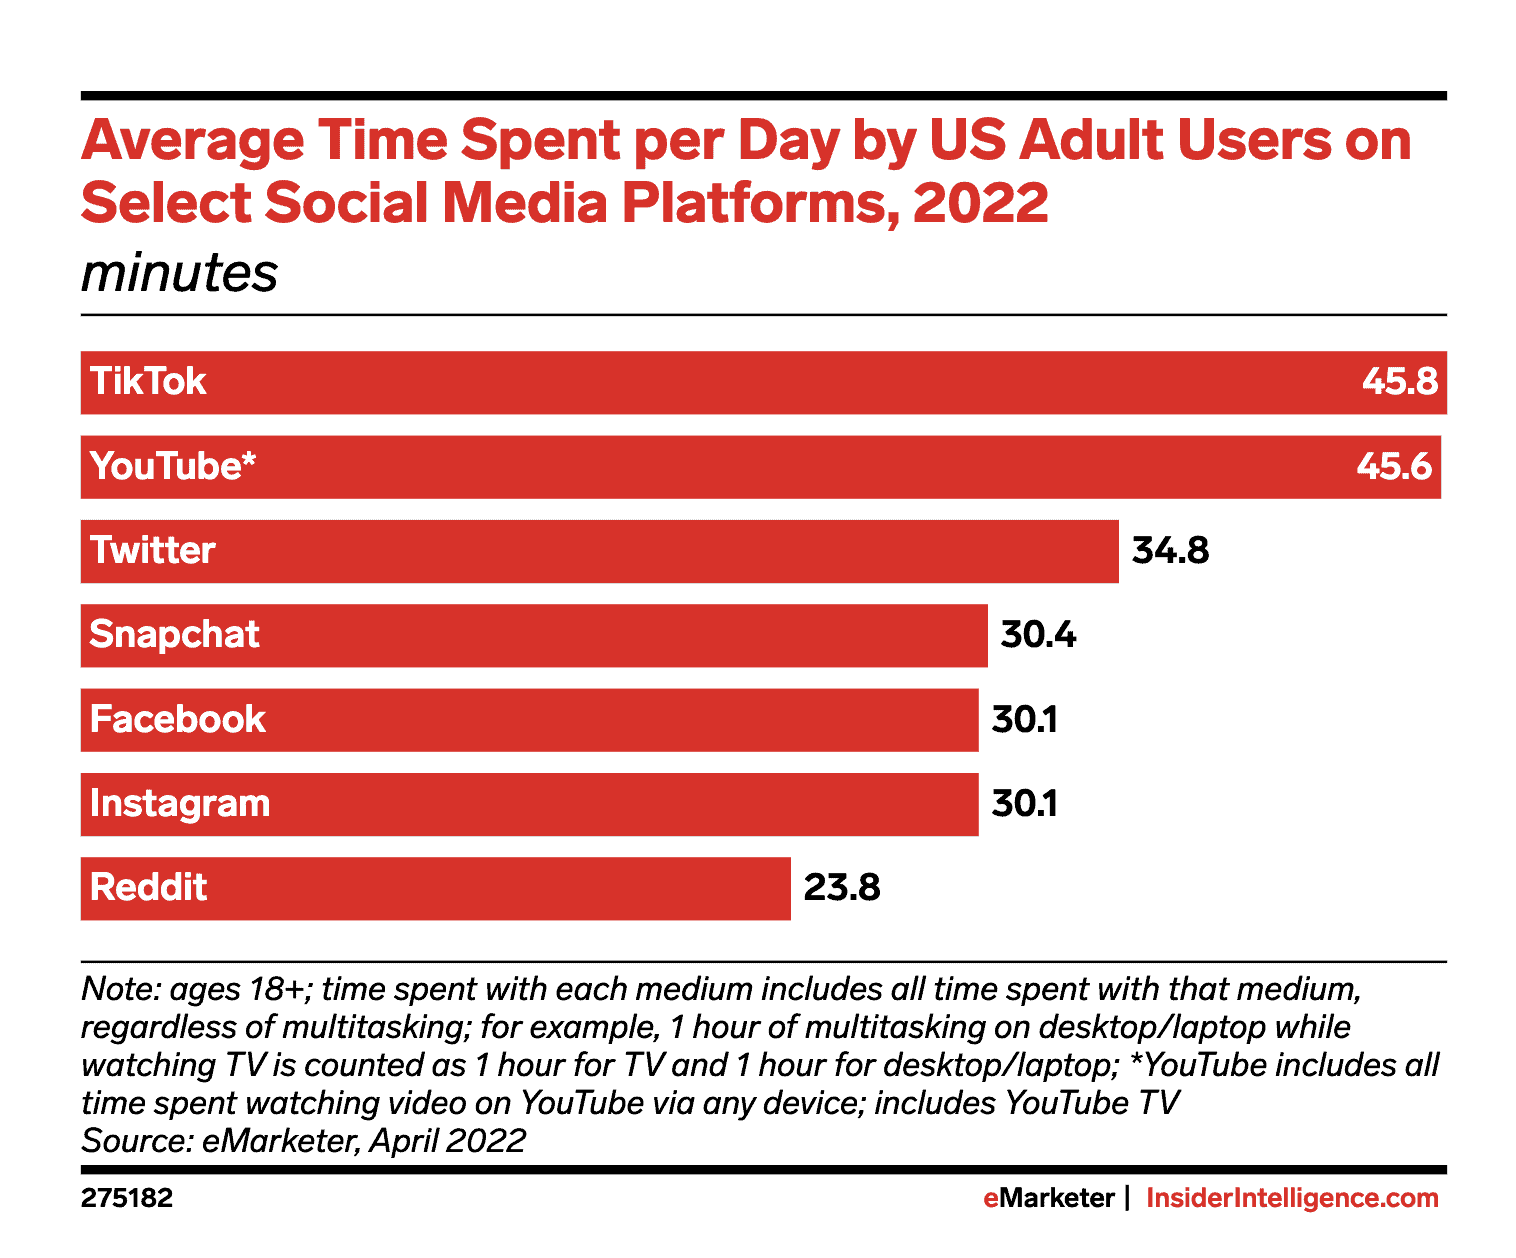 Average Time Spent per Day by US Adult Users on Social Media Platforms in 2022 